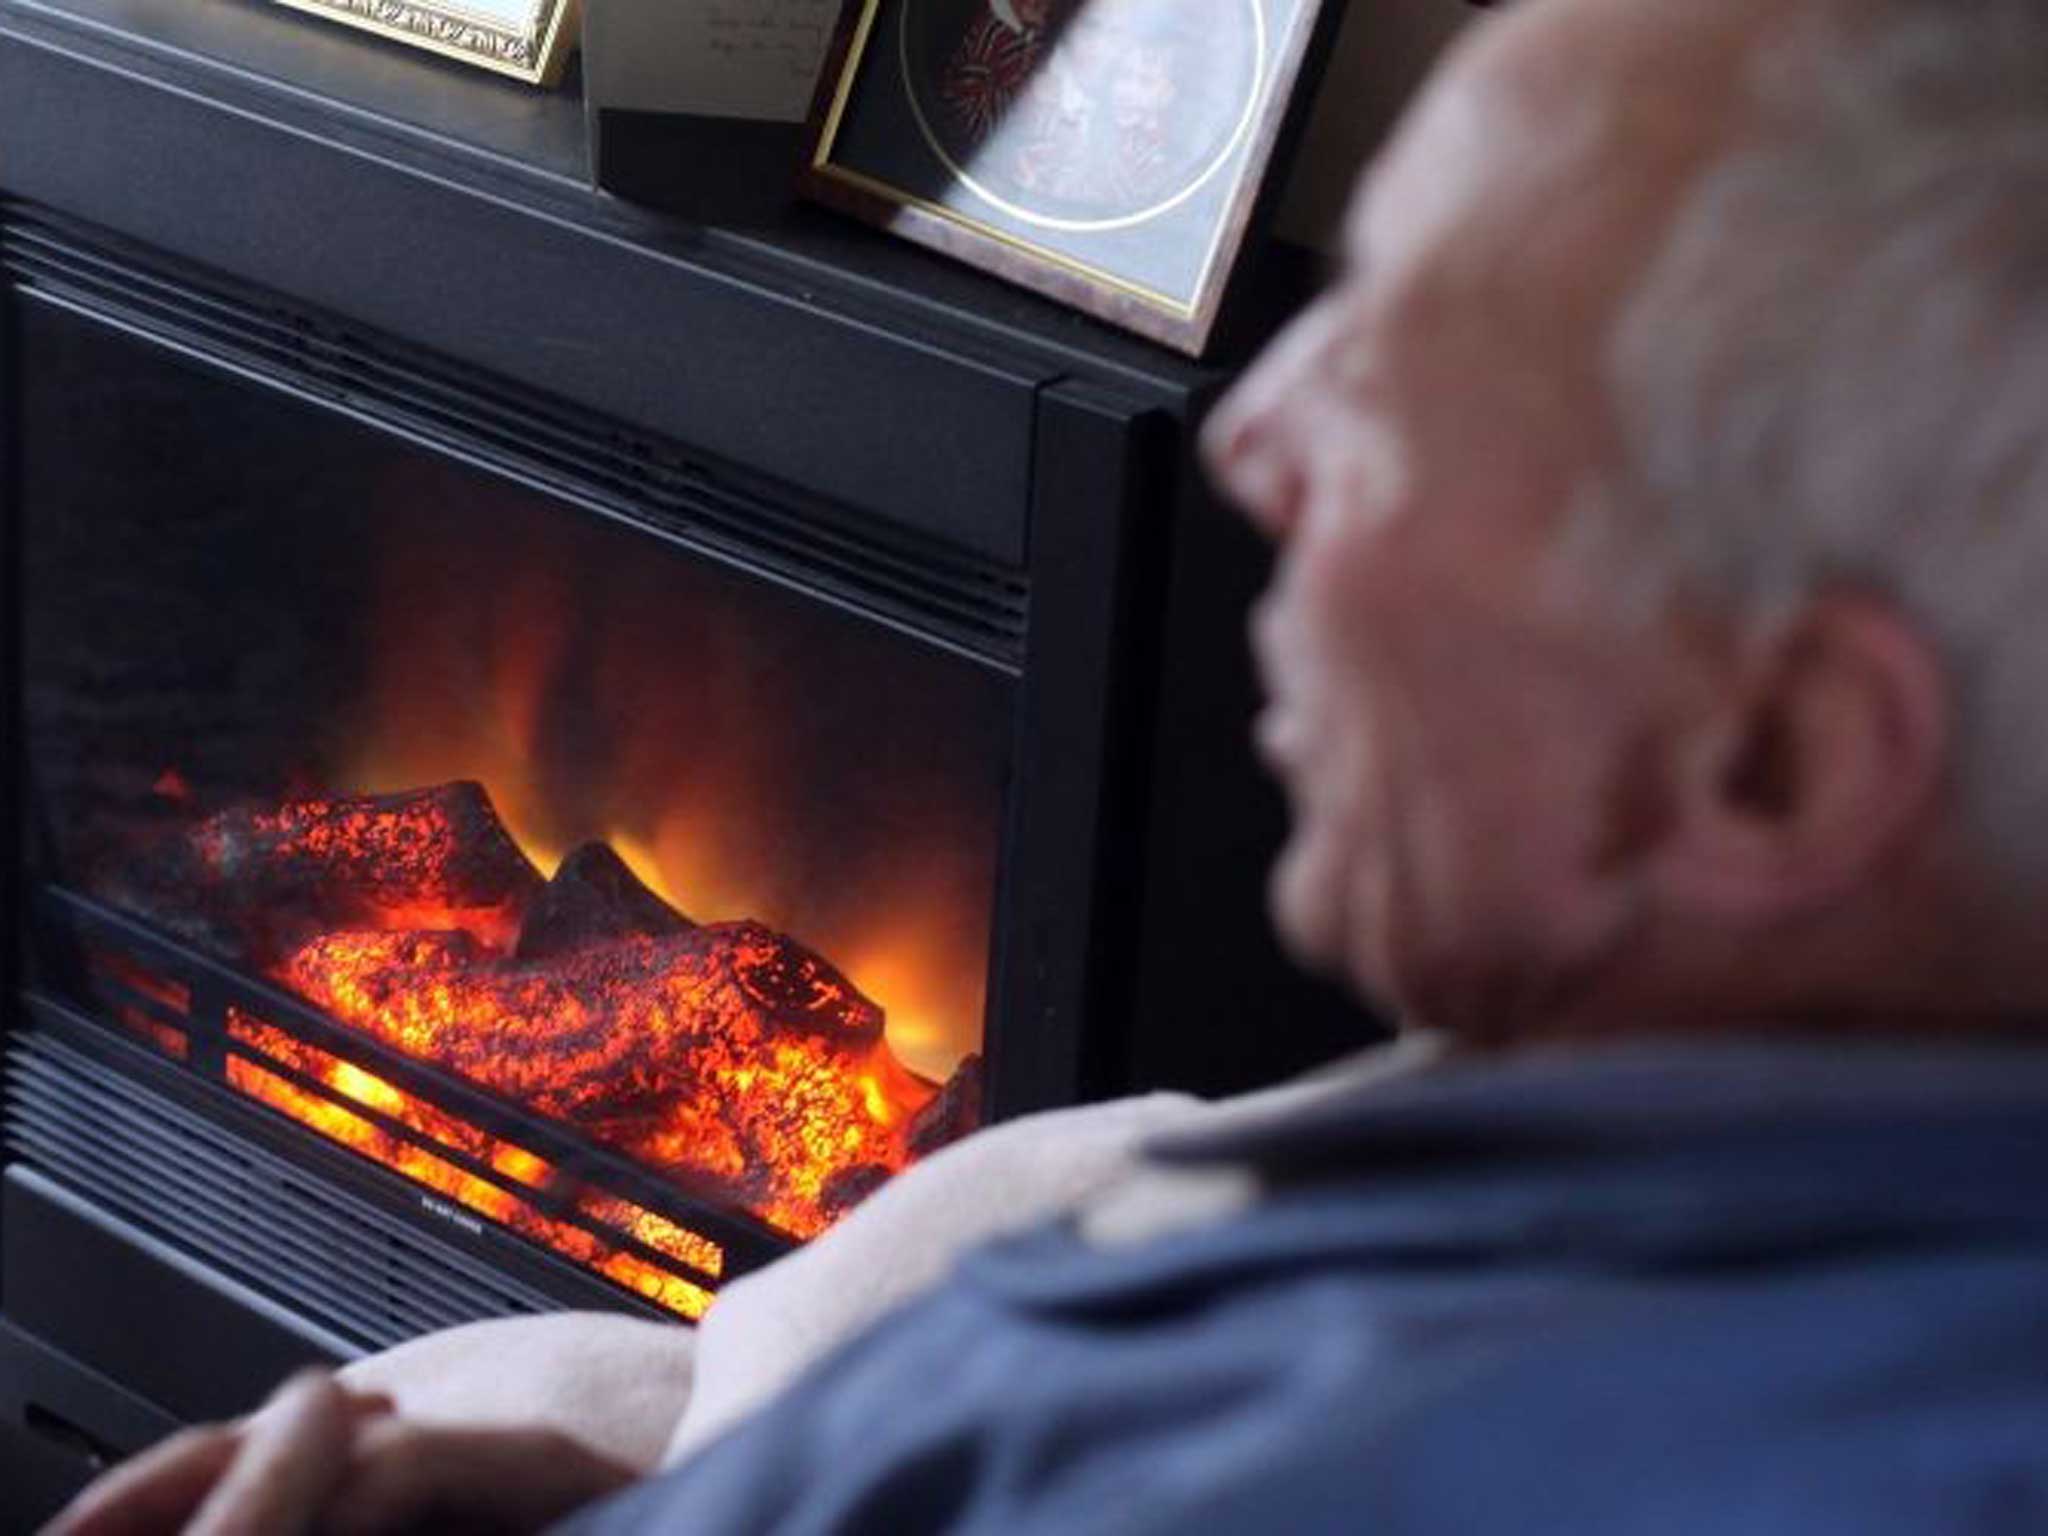 A report concludes that more than two million households are struggling to keep warm as many people choose “eating over heating”